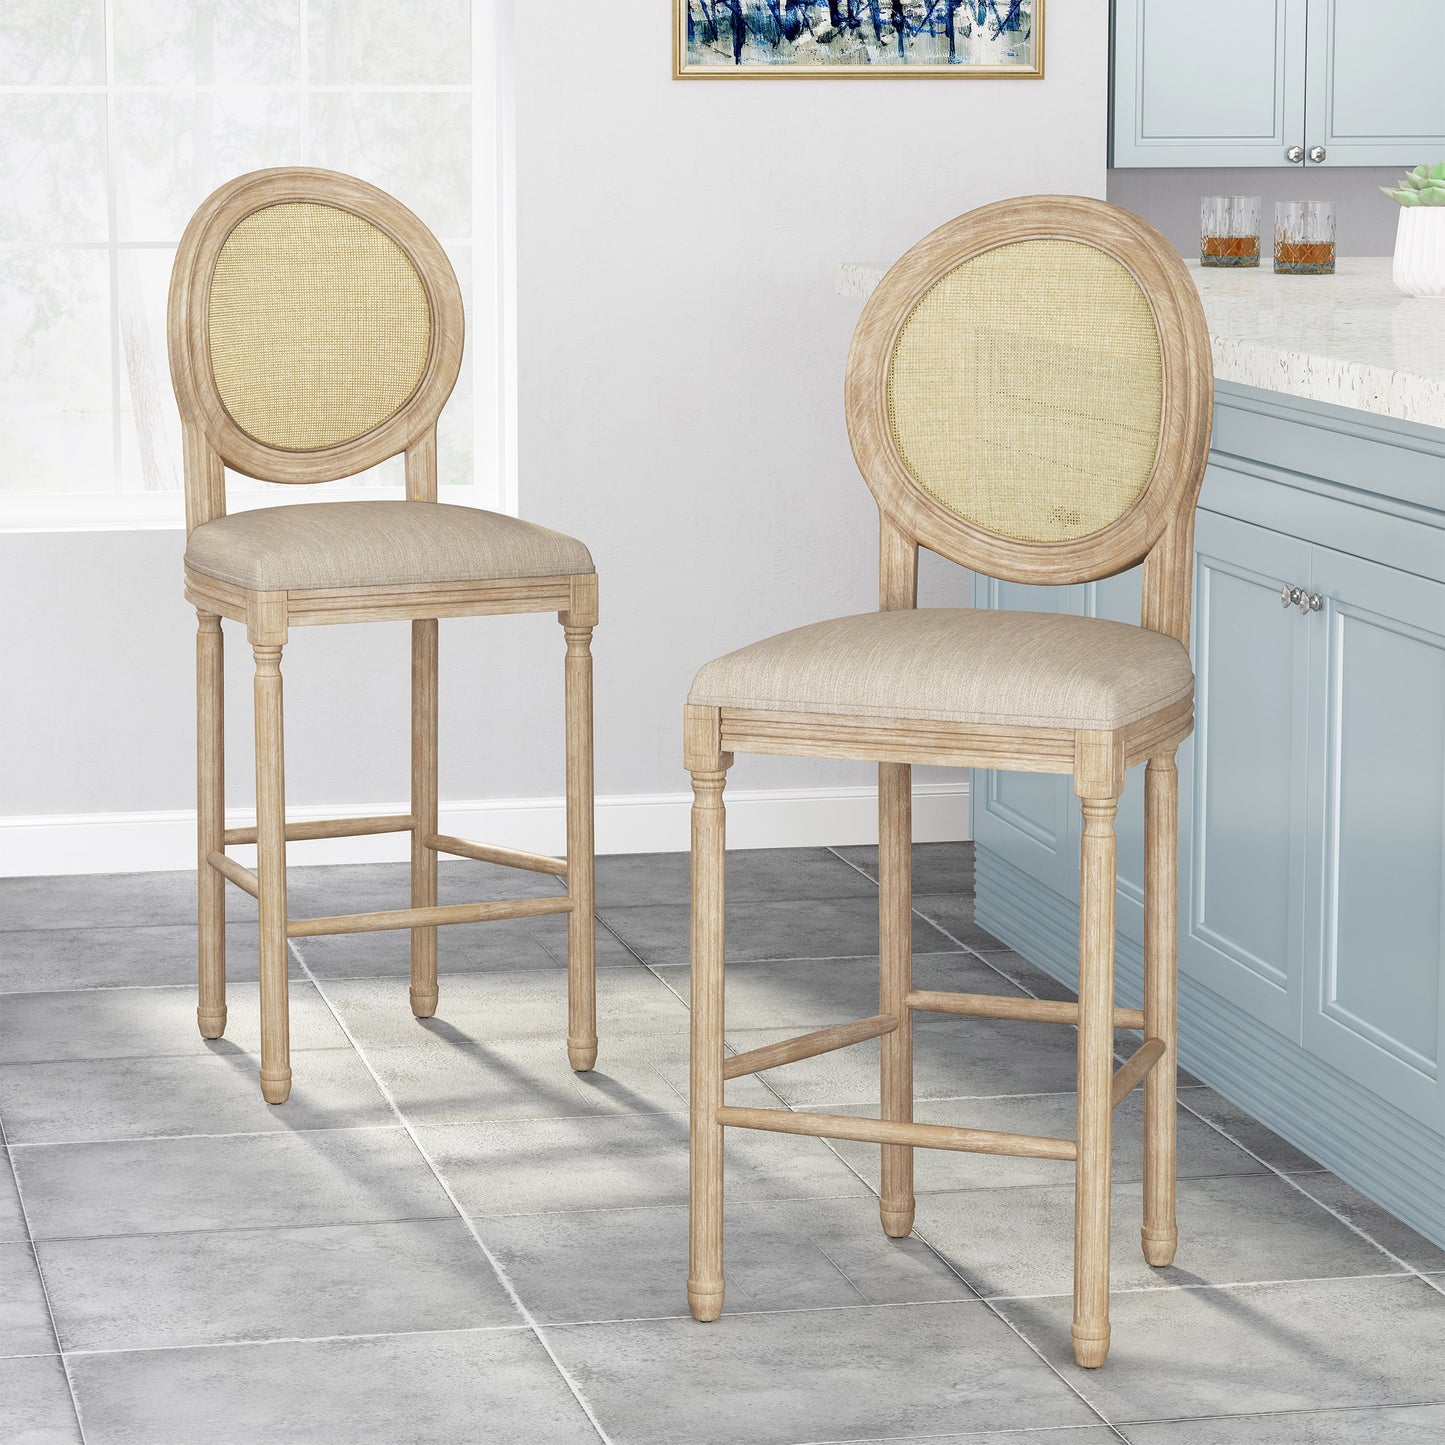 Salton French Country Wooden Barstools with Upholstered Seating (Set of 2)